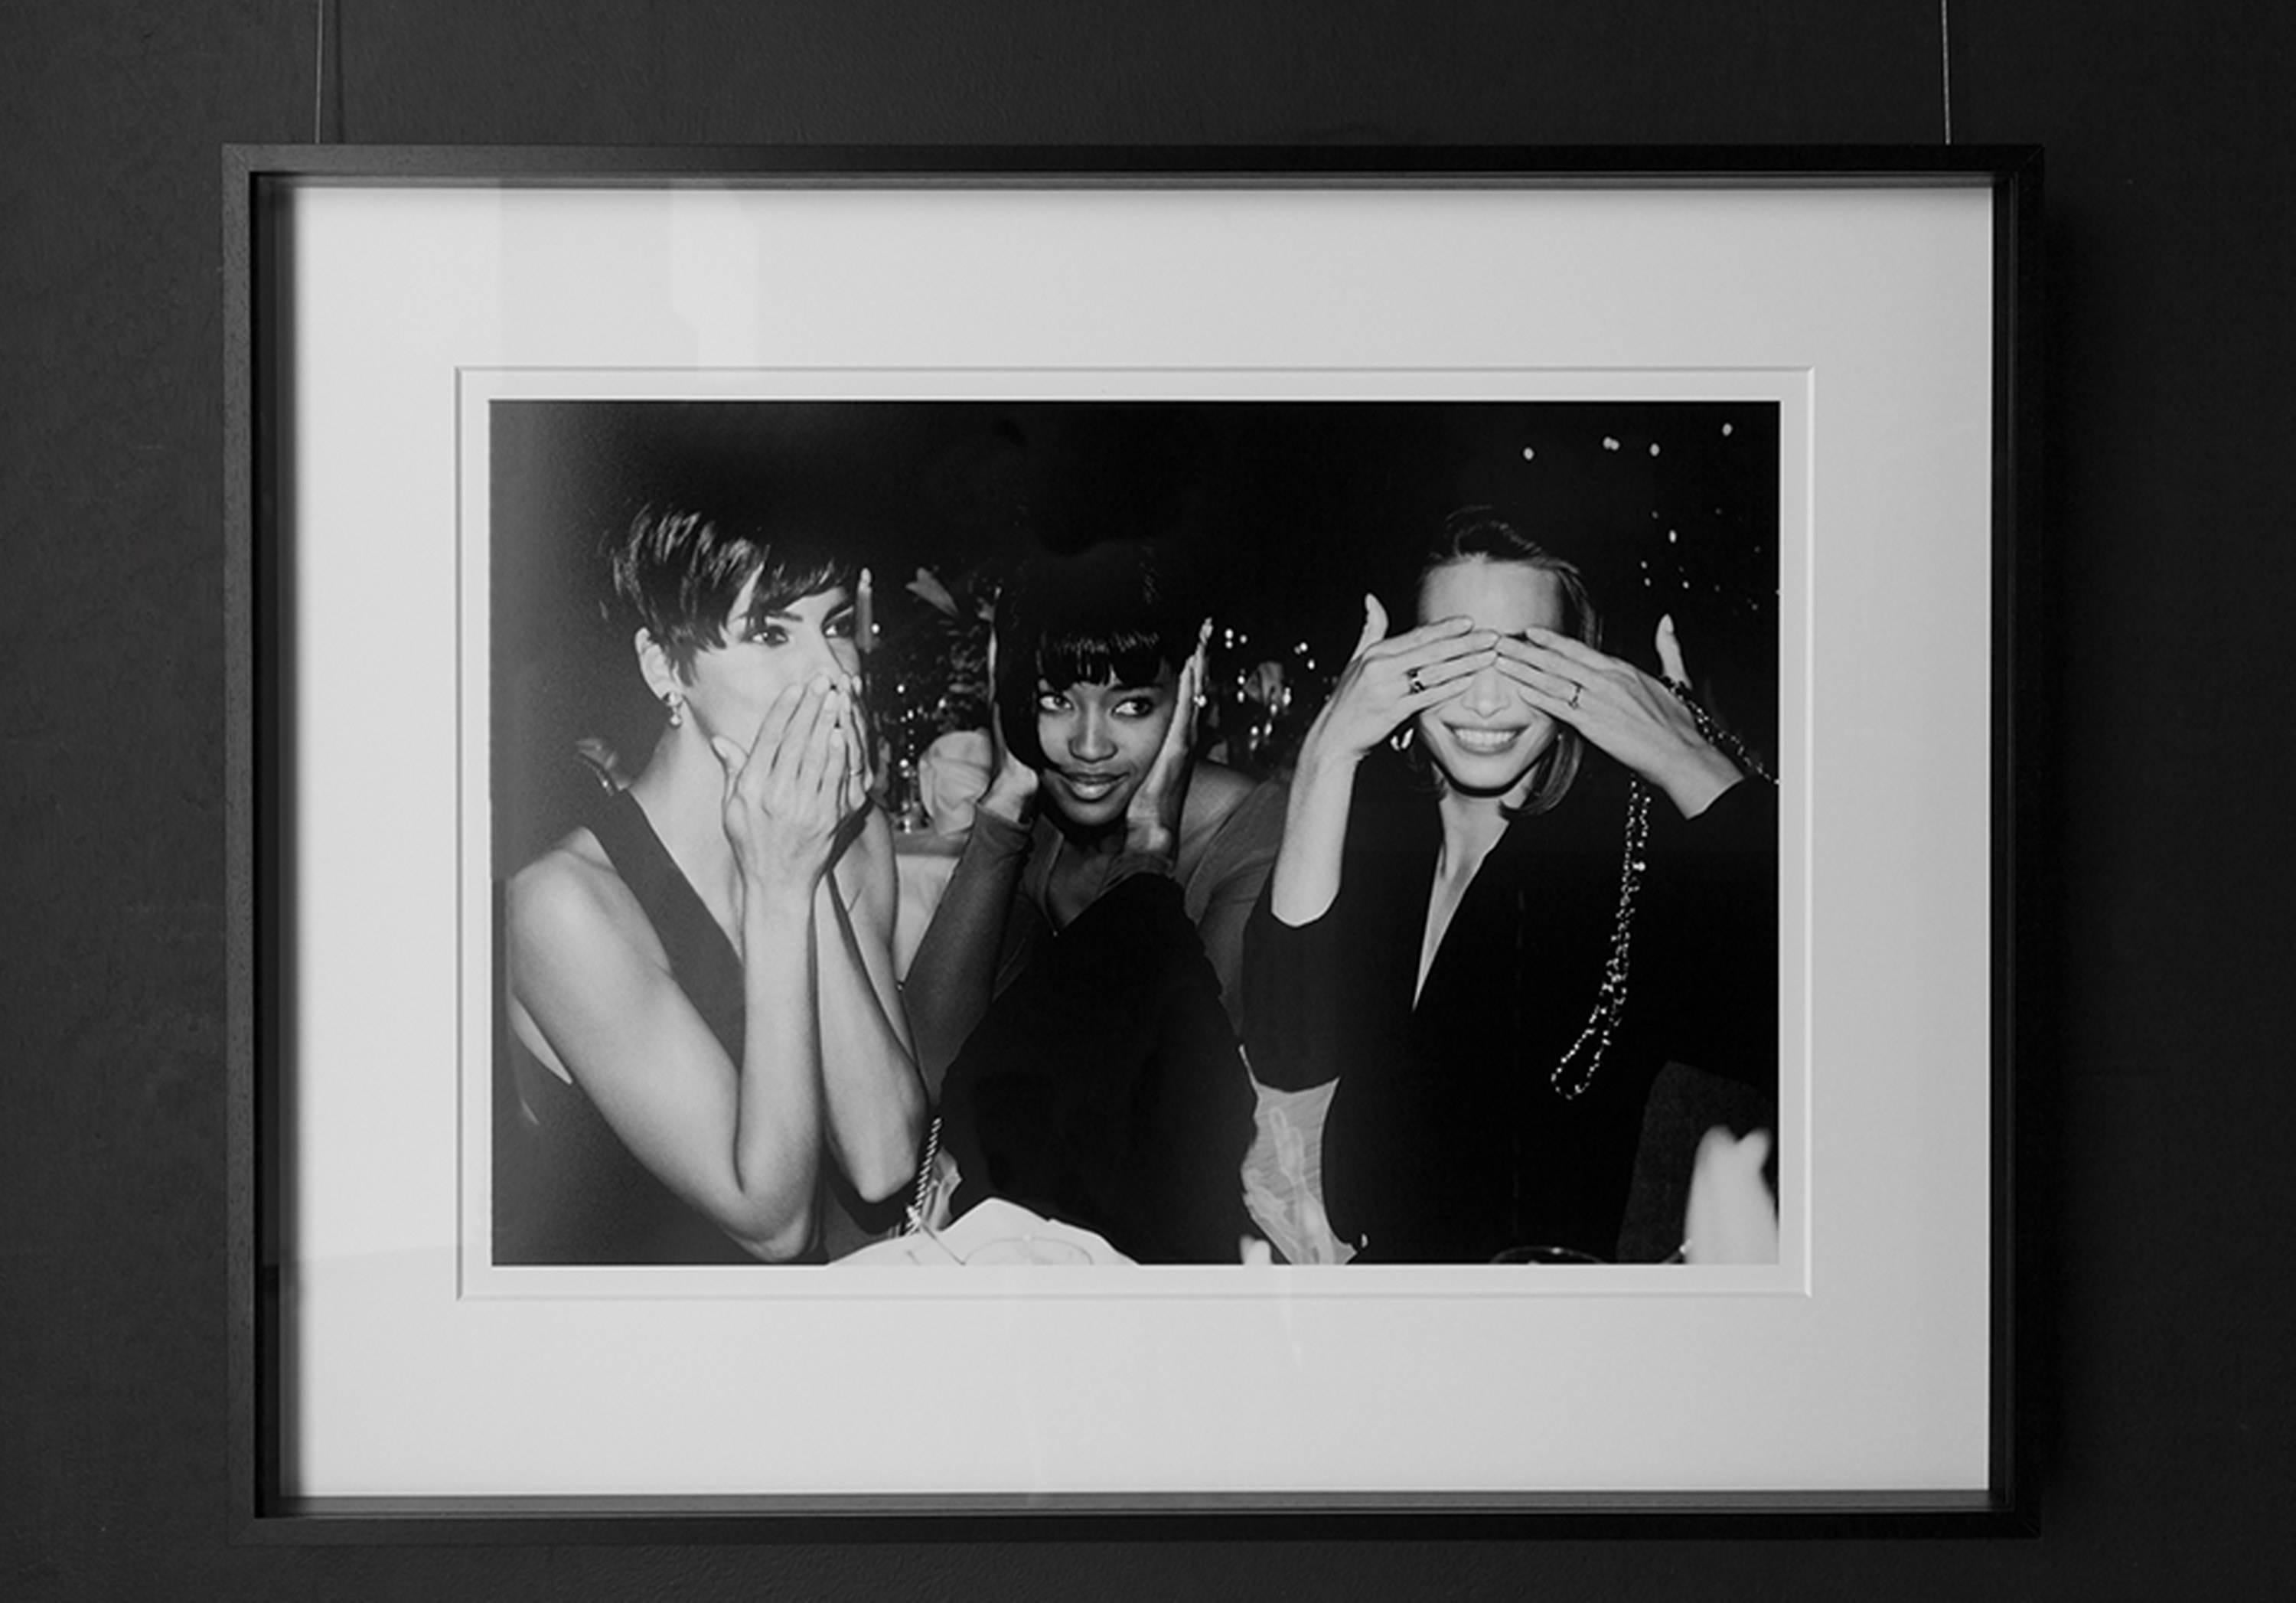 Linda Evangelista, Naomi Campbell and Christy Turlington - supermodels in b&w - Photograph by Roxanne Lowit